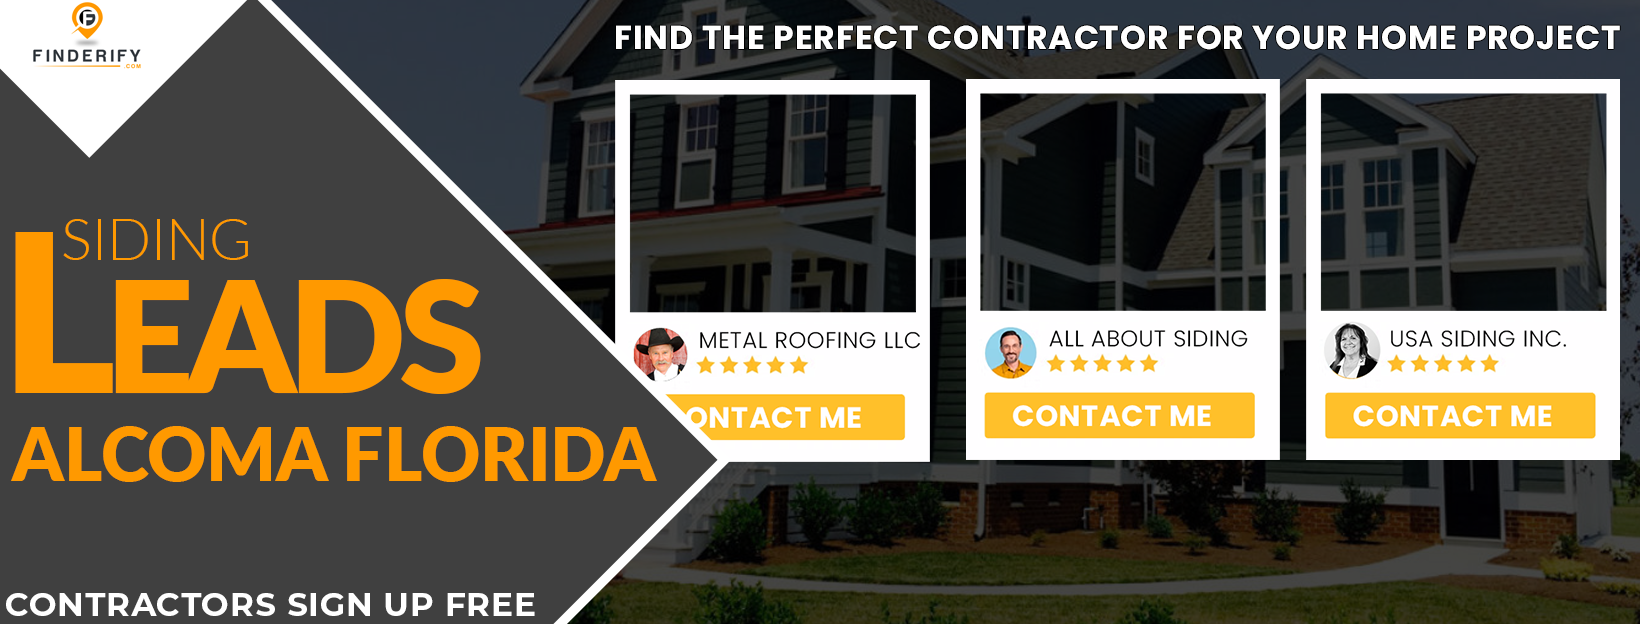 Alcoma FL Siding Leads | Generate More Leads with Finderify.com